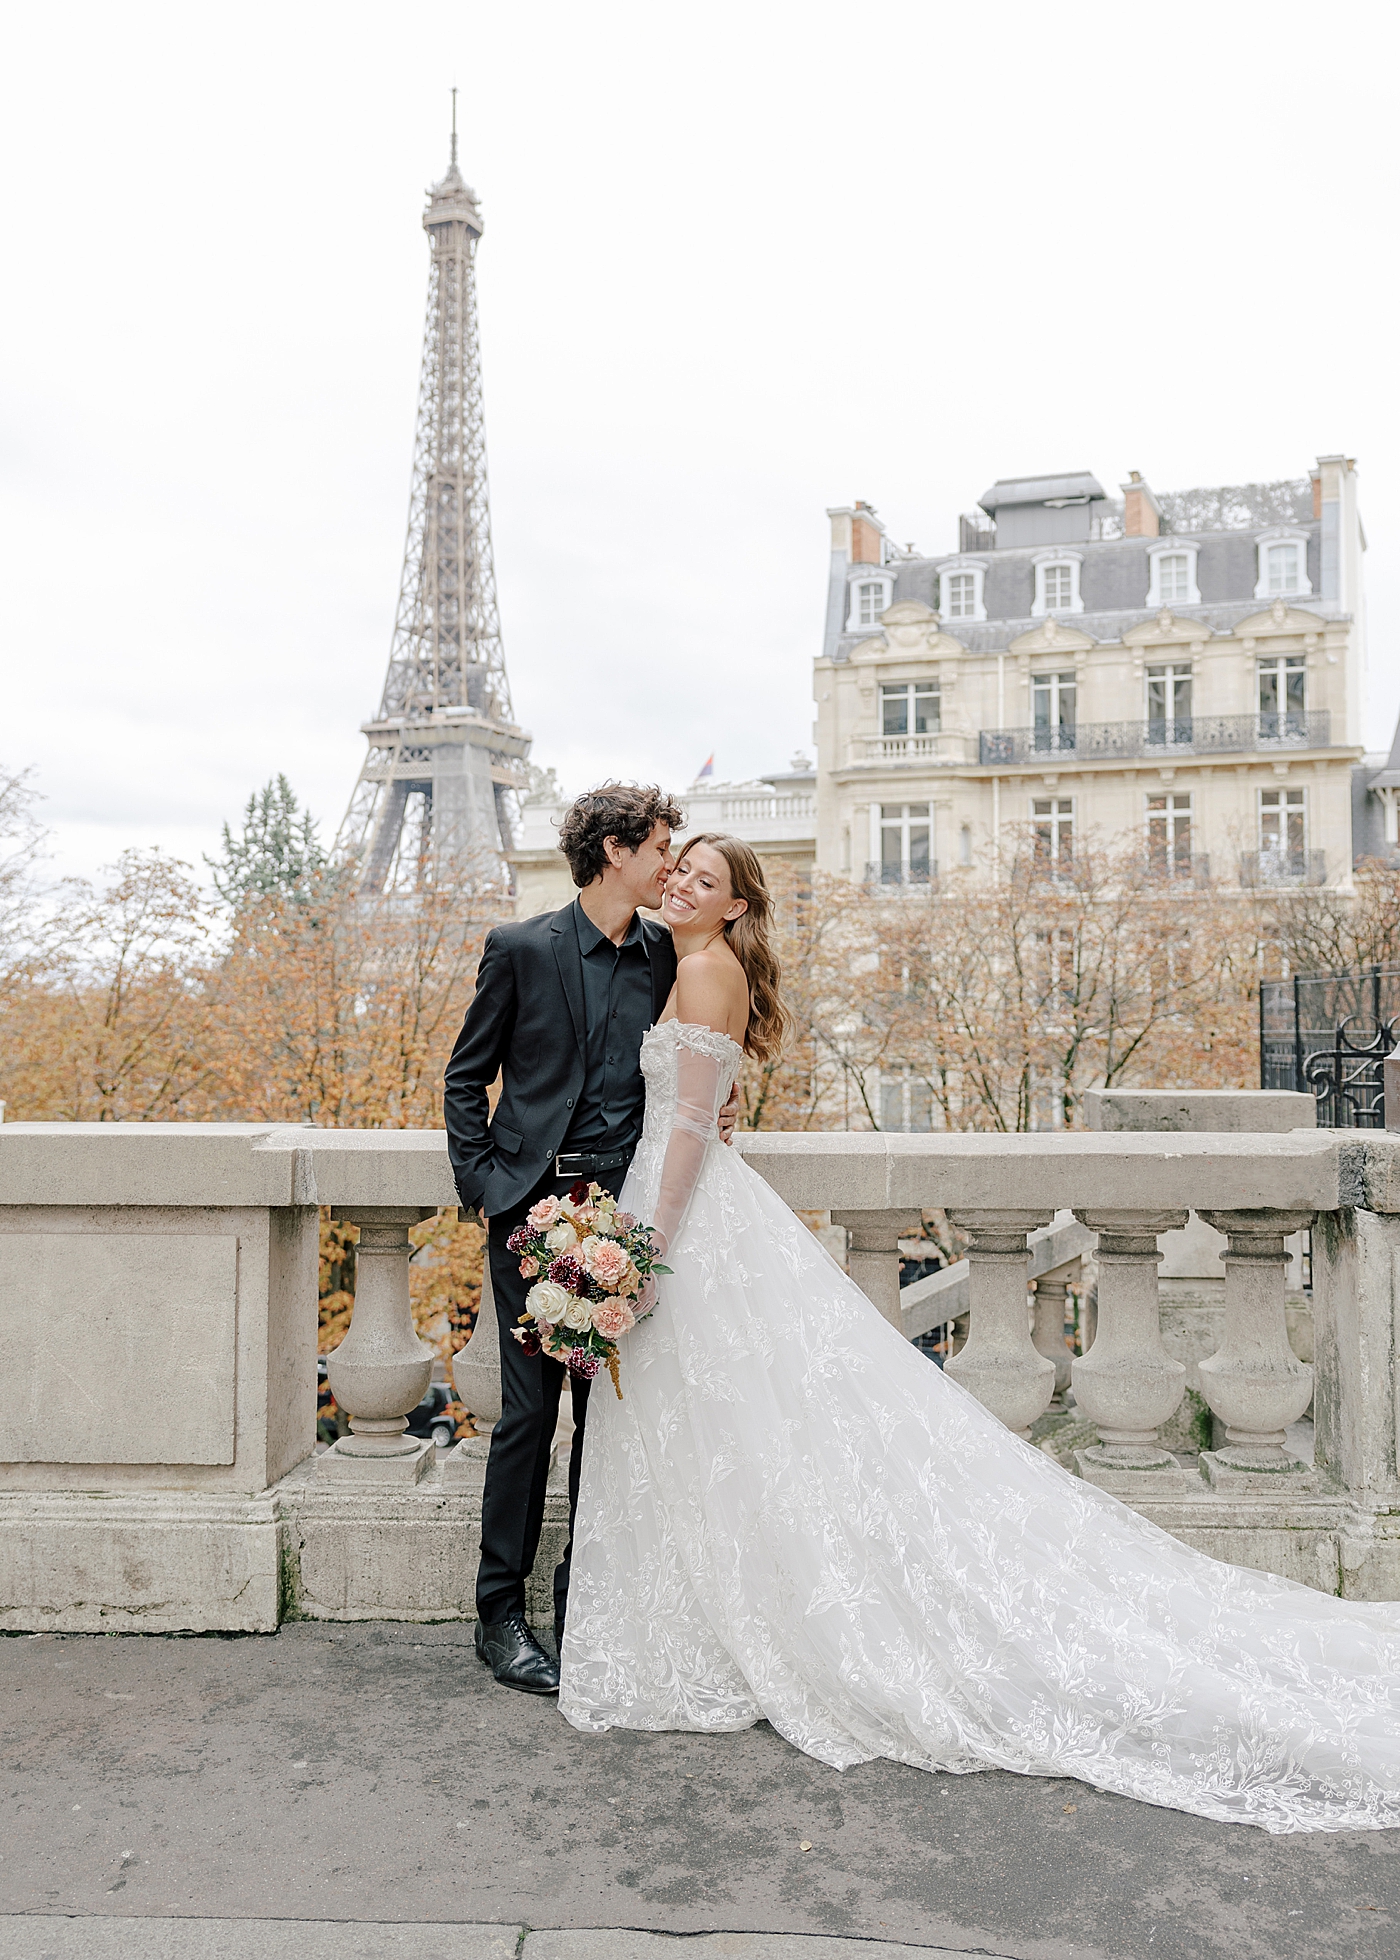 Image of a bride and groom embracing and kissing in Paris with the Eiffel tower in the background | Image by Hope Helmuth Photography